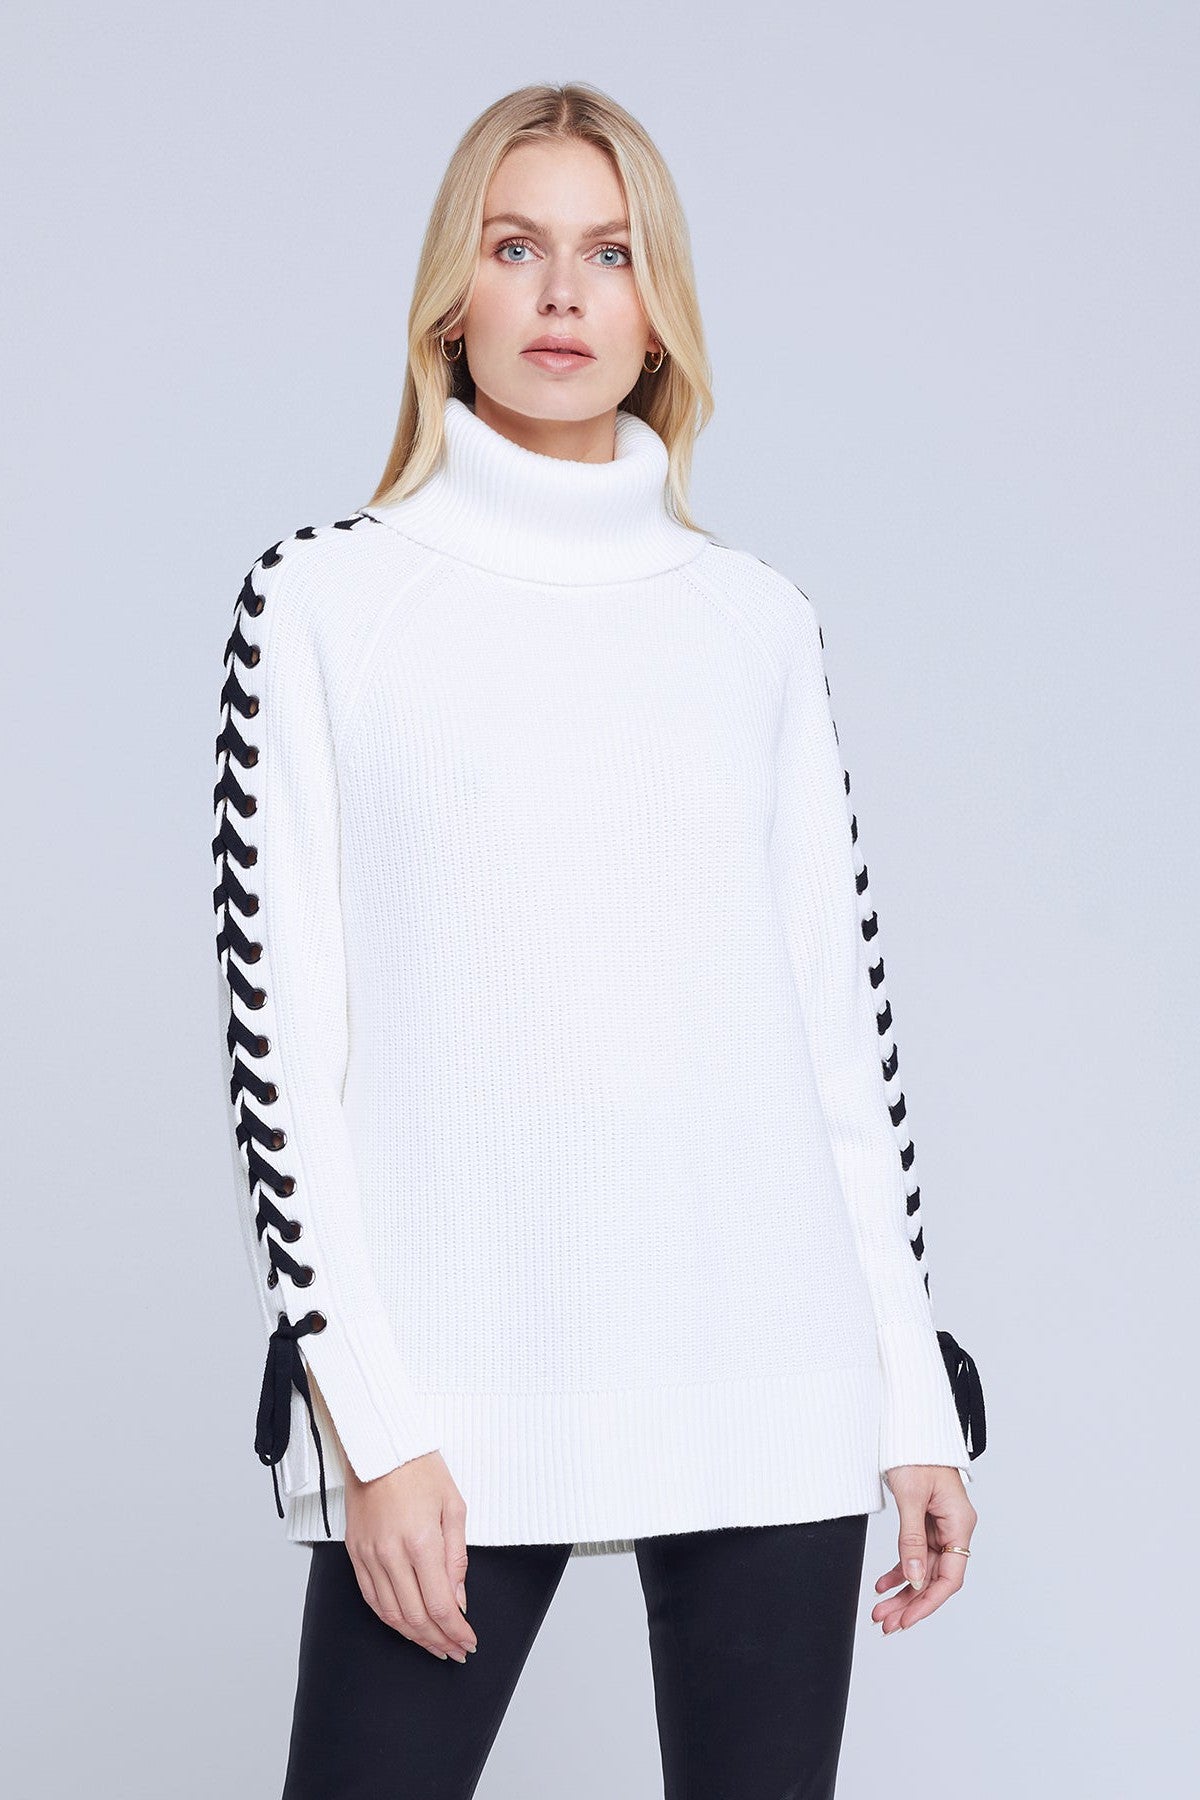 L'AGENCE NOLA LACE UP SWEATER IN IVORY/BLACK